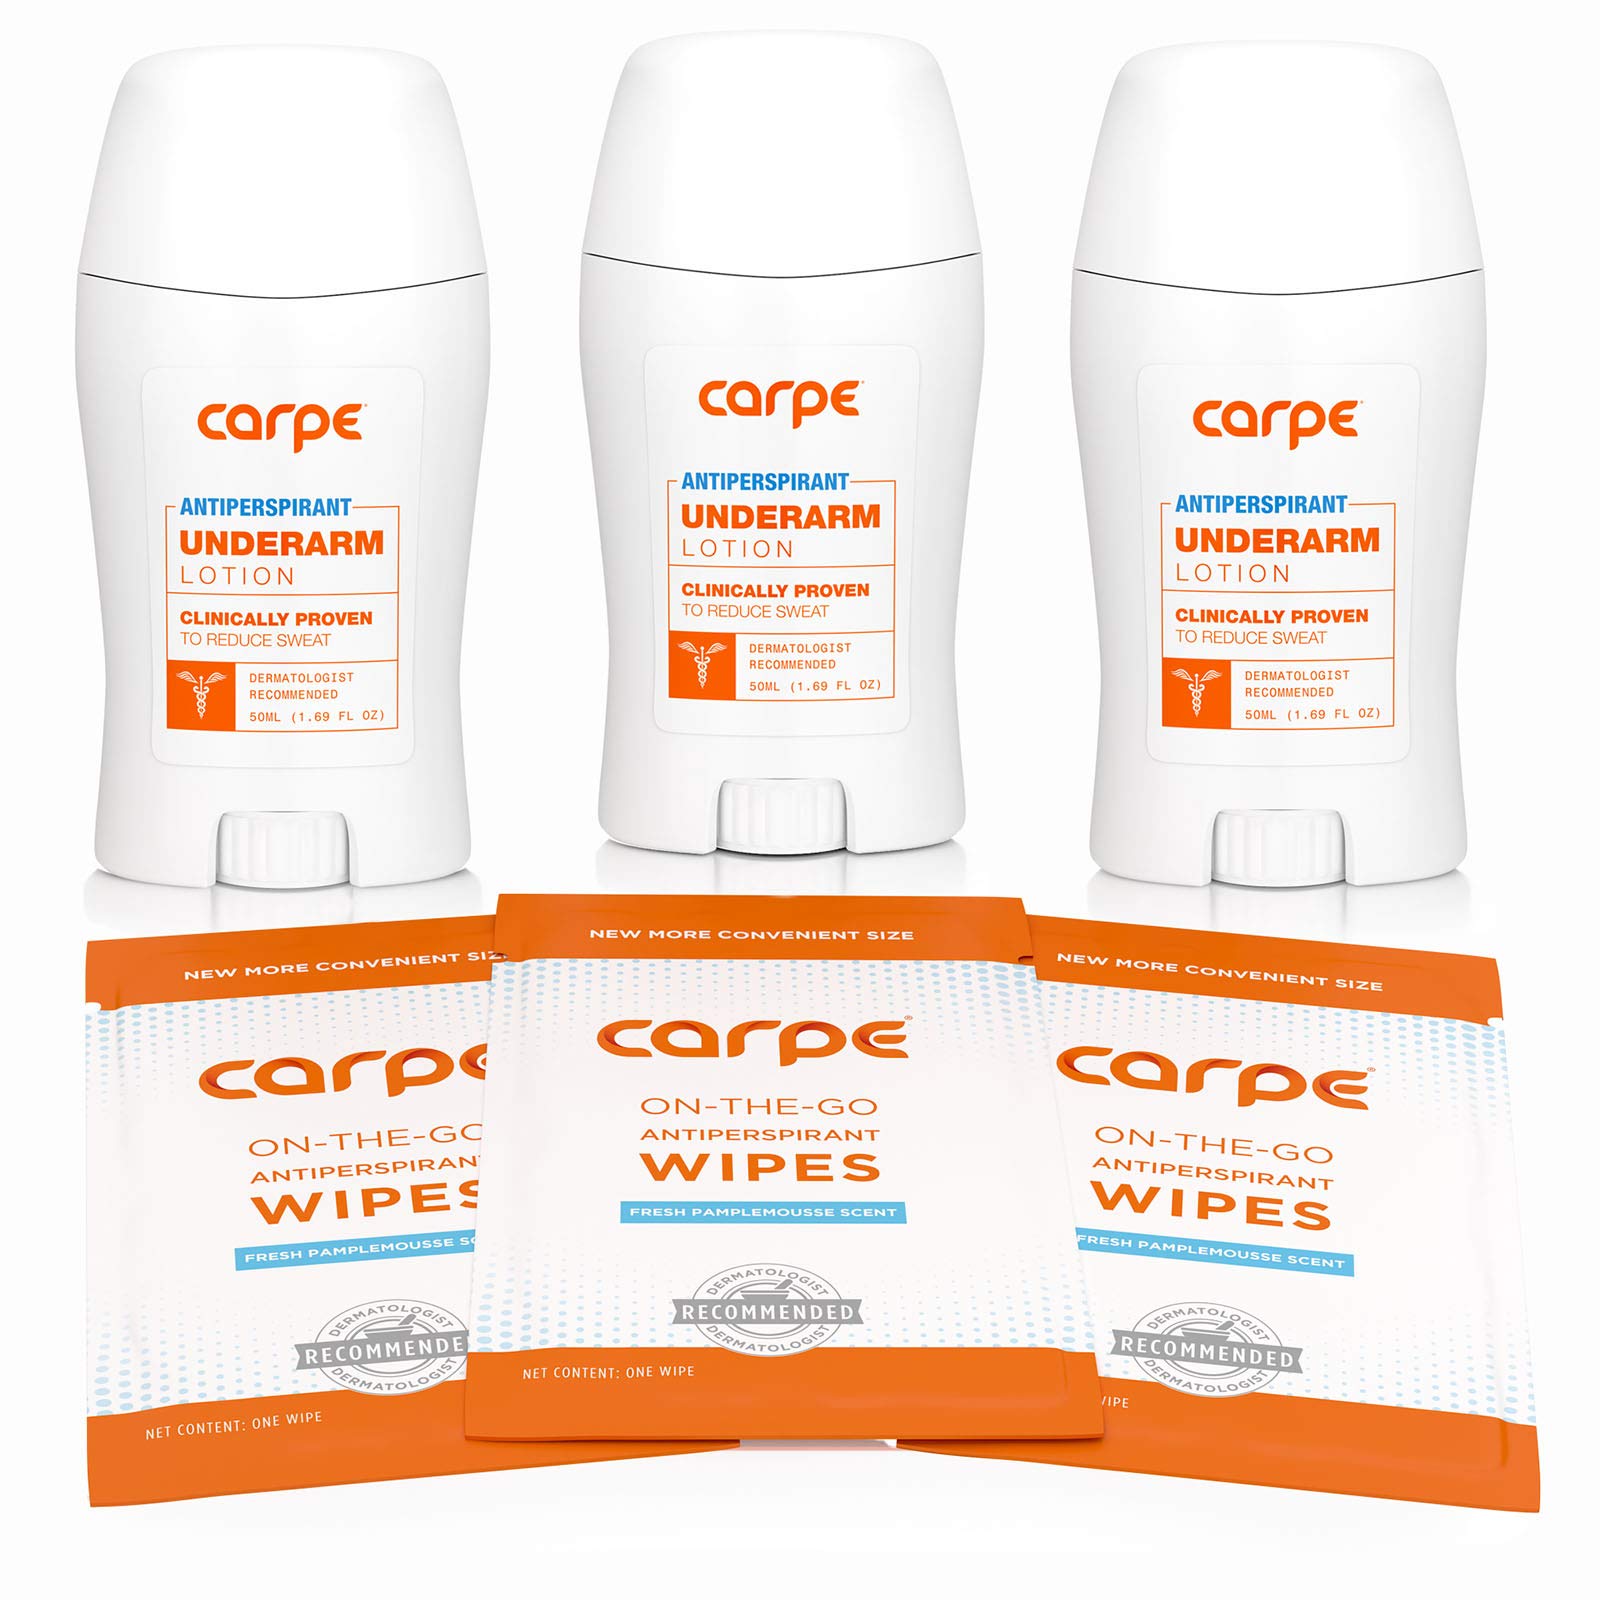 We tried the Carpe deodorant to stop sweat and odor - TODAY